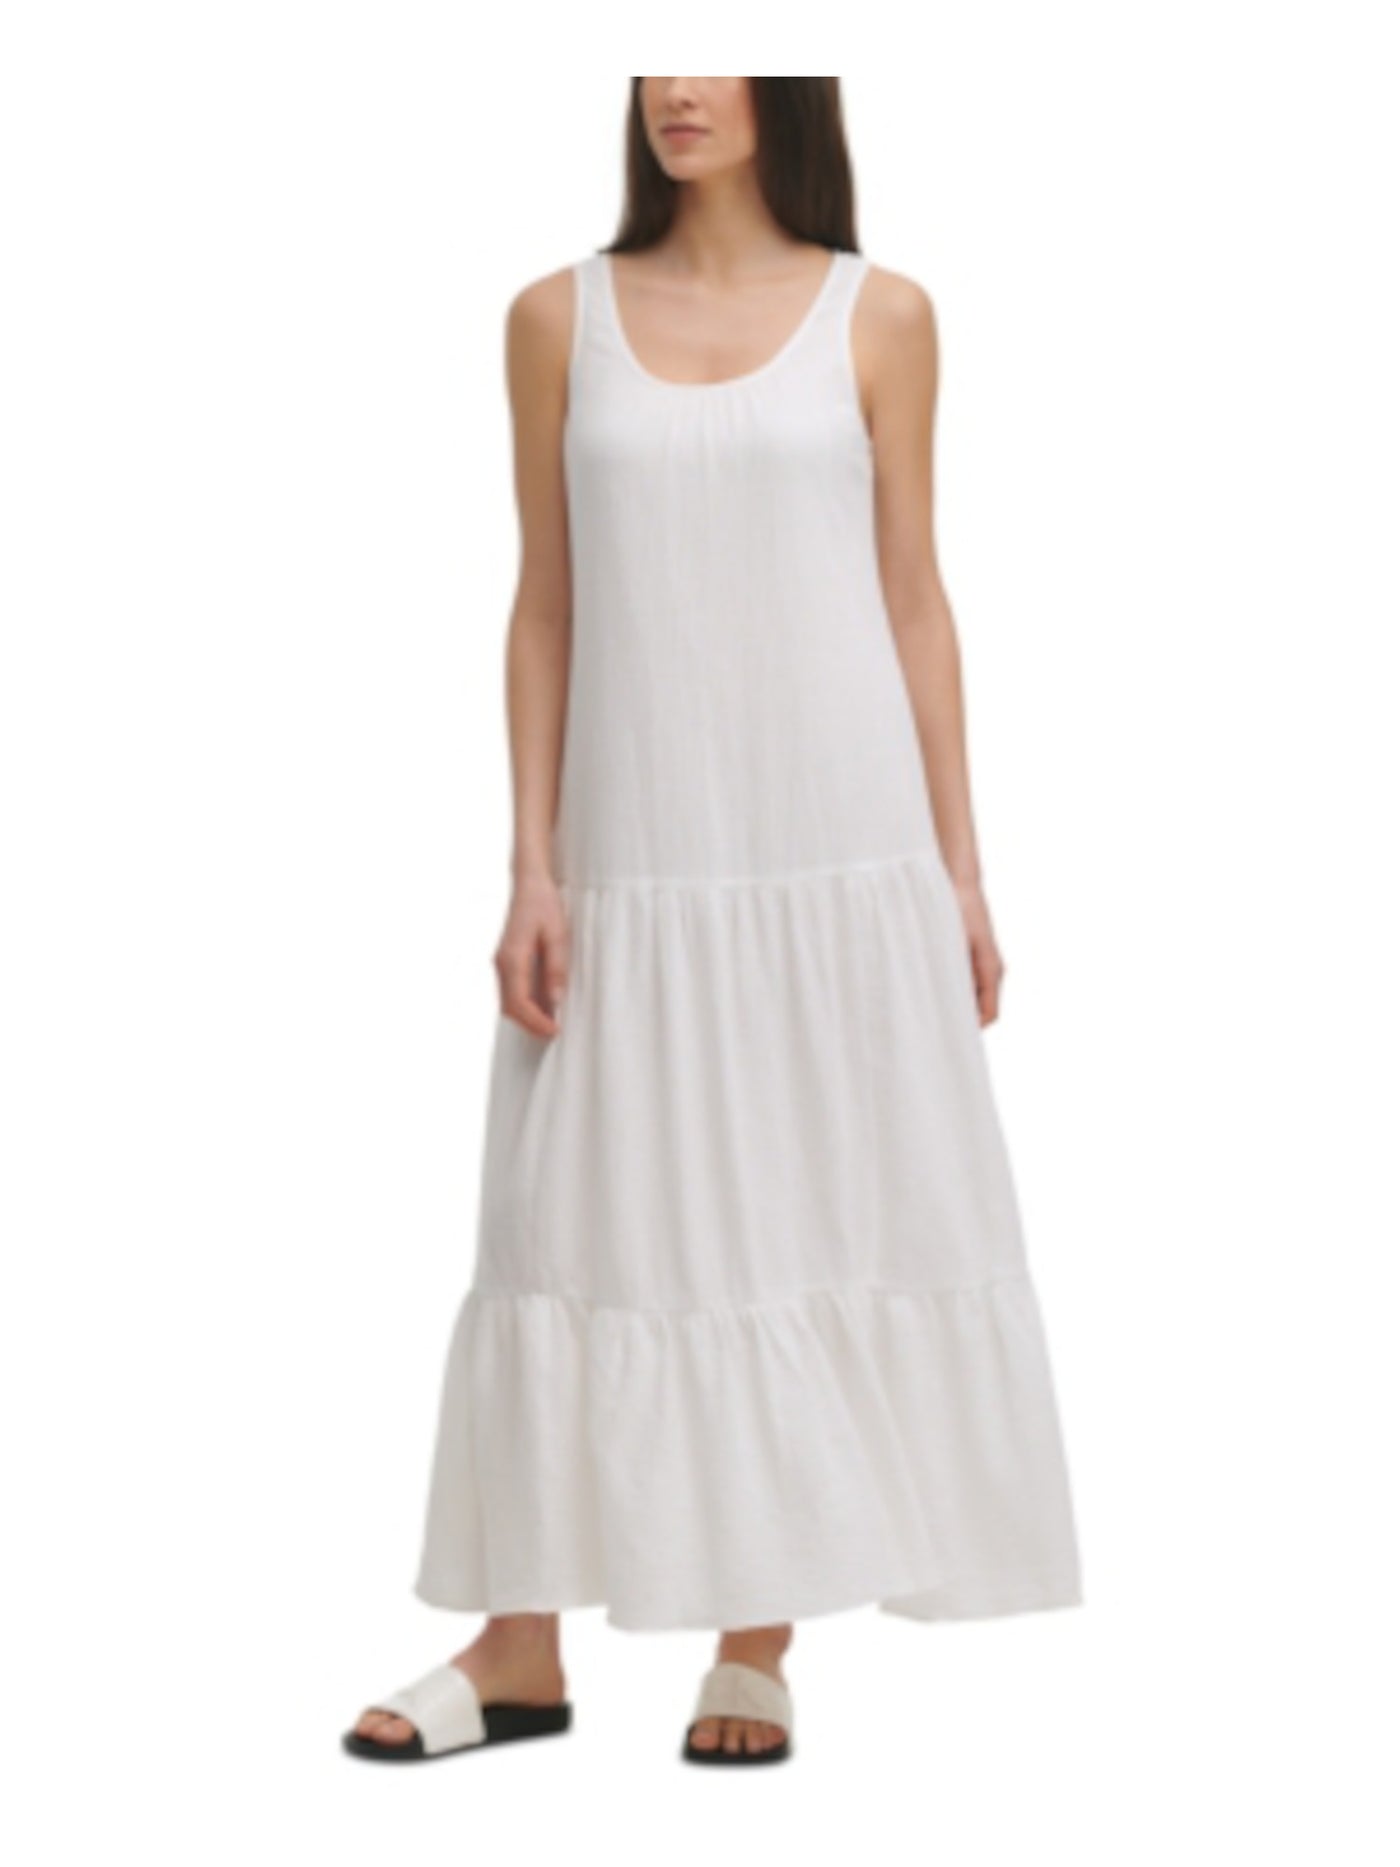 CALVIN KLEIN Womens White Textured Lined Gauze Tiered Keyhole Back Sleeveless Scoop Neck Maxi Shift Dress S